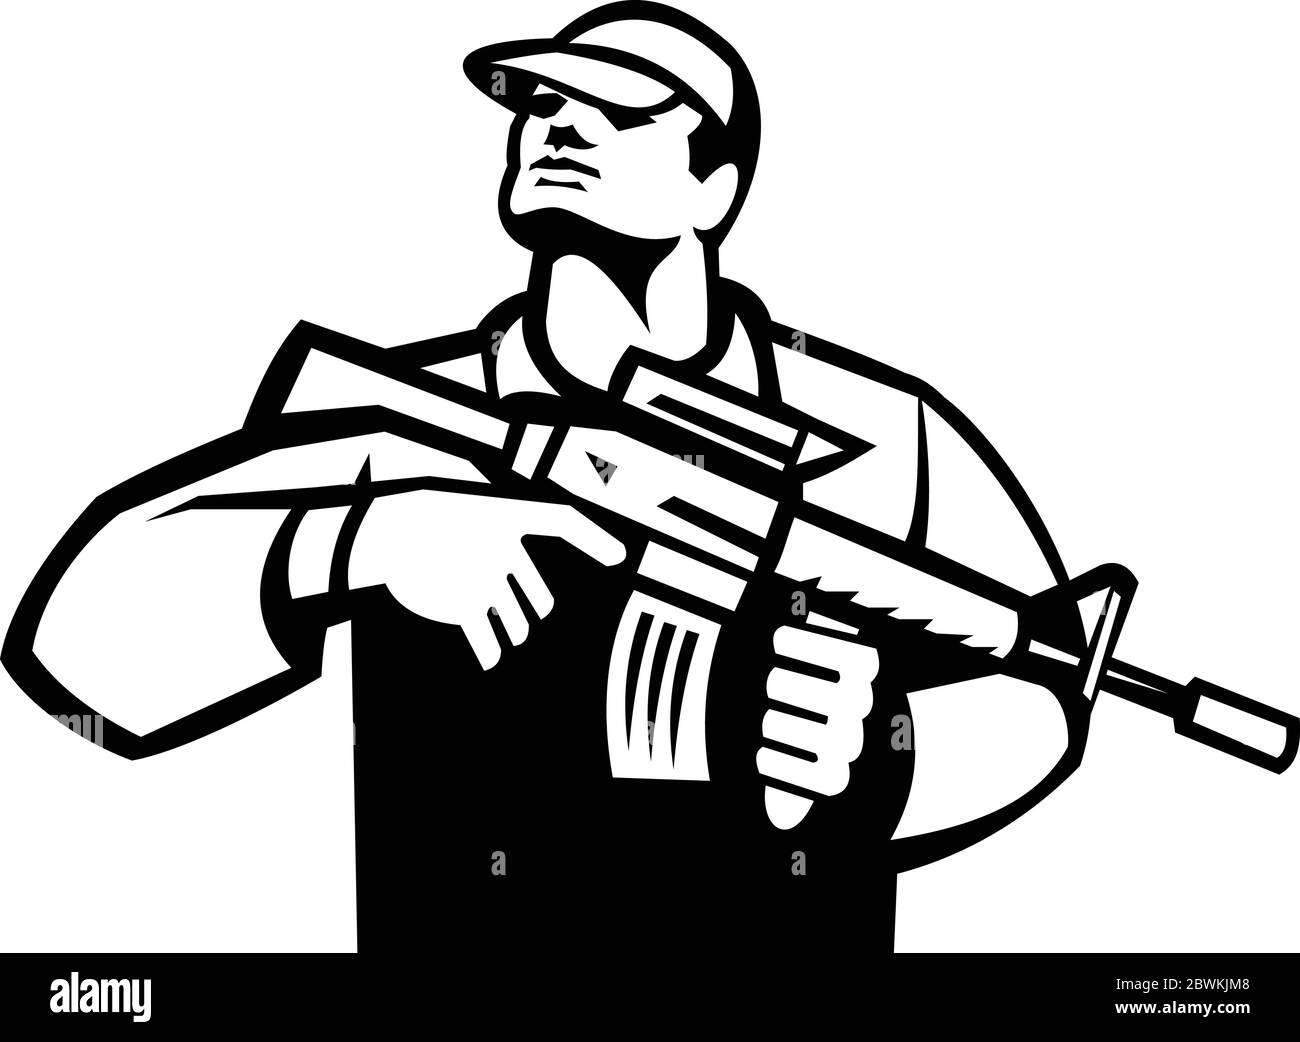 Black and White Illustration of an American soldier serviceman holding an assault rifle facing front looking up on isolated white background. Stock Vector